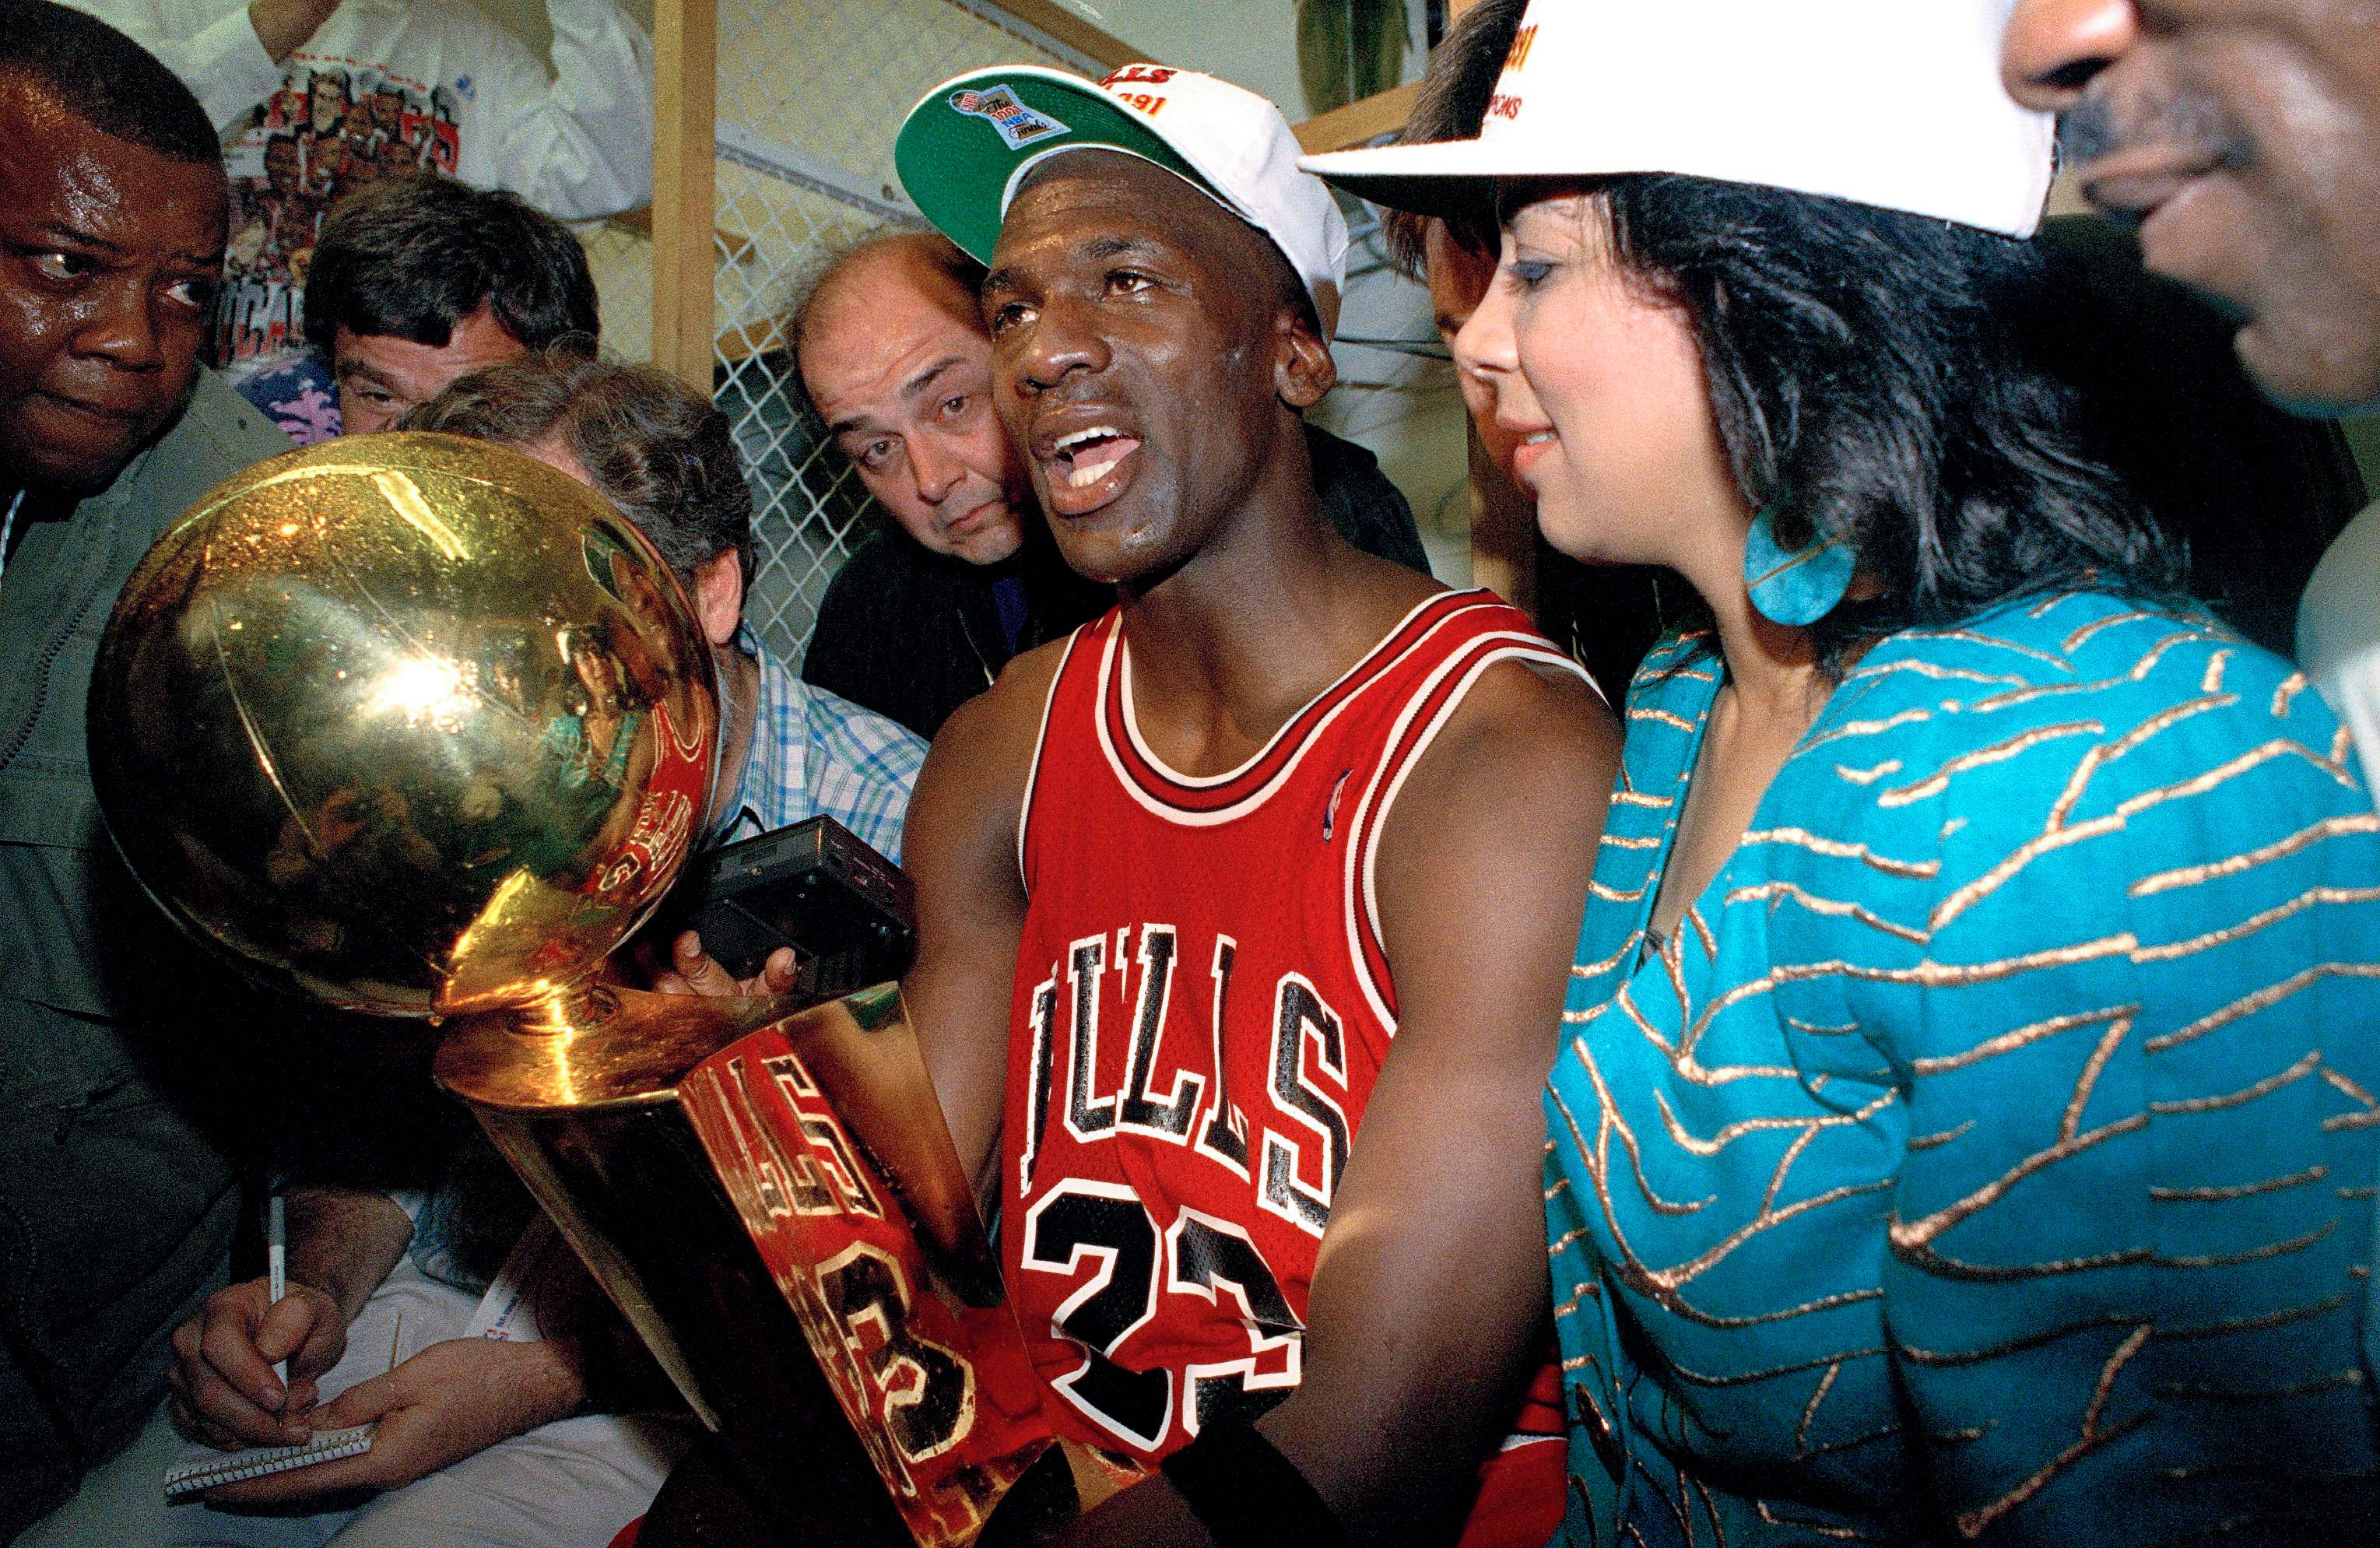 Last Dance: Larry inspired Jordan to become a champion